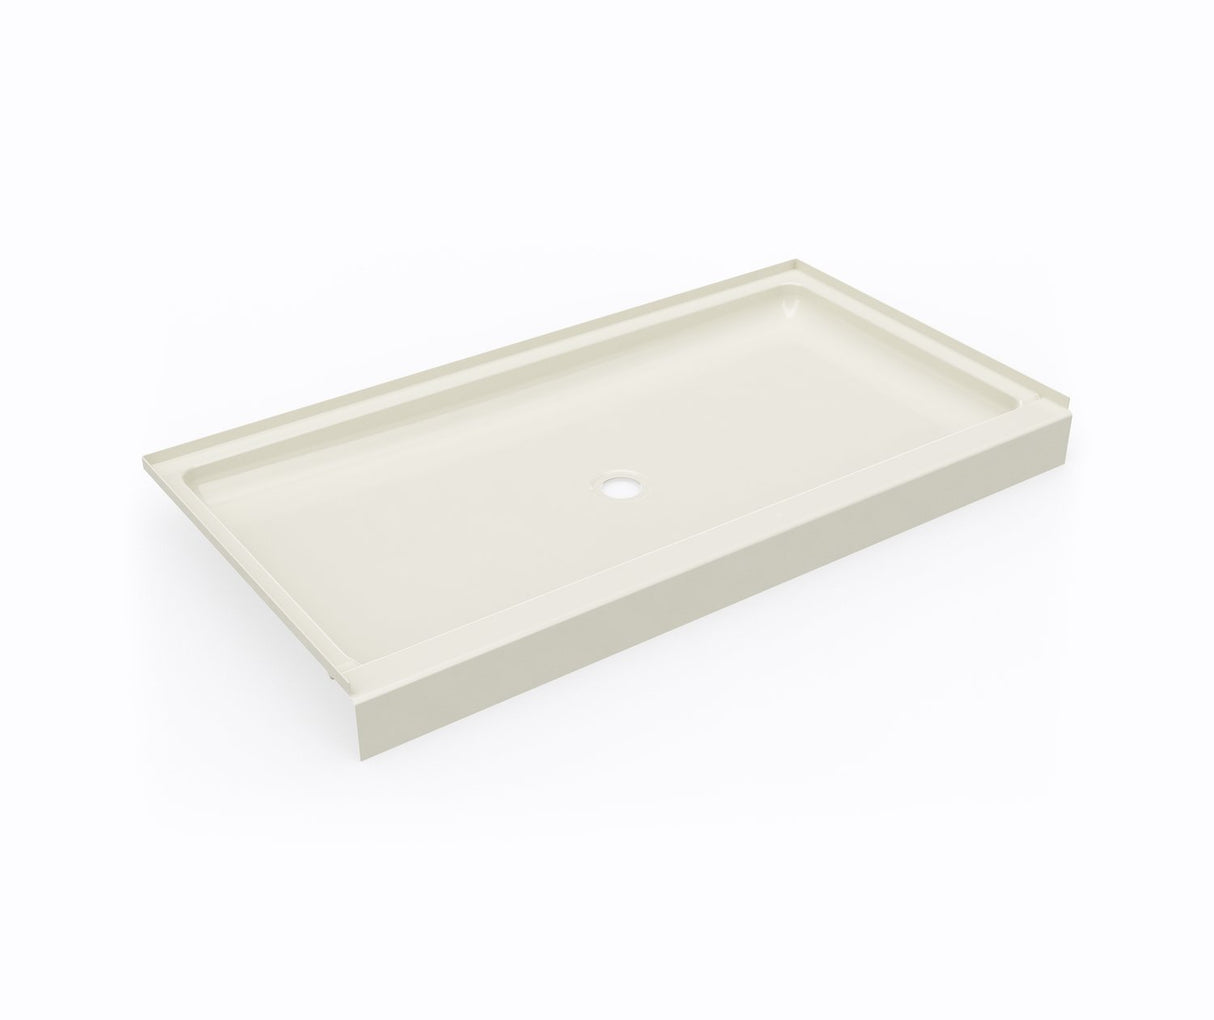 Swanstone SS-3260 32 x 60 Swanstone Alcove Shower Pan with Center Drain in Bone SF03260MD.037